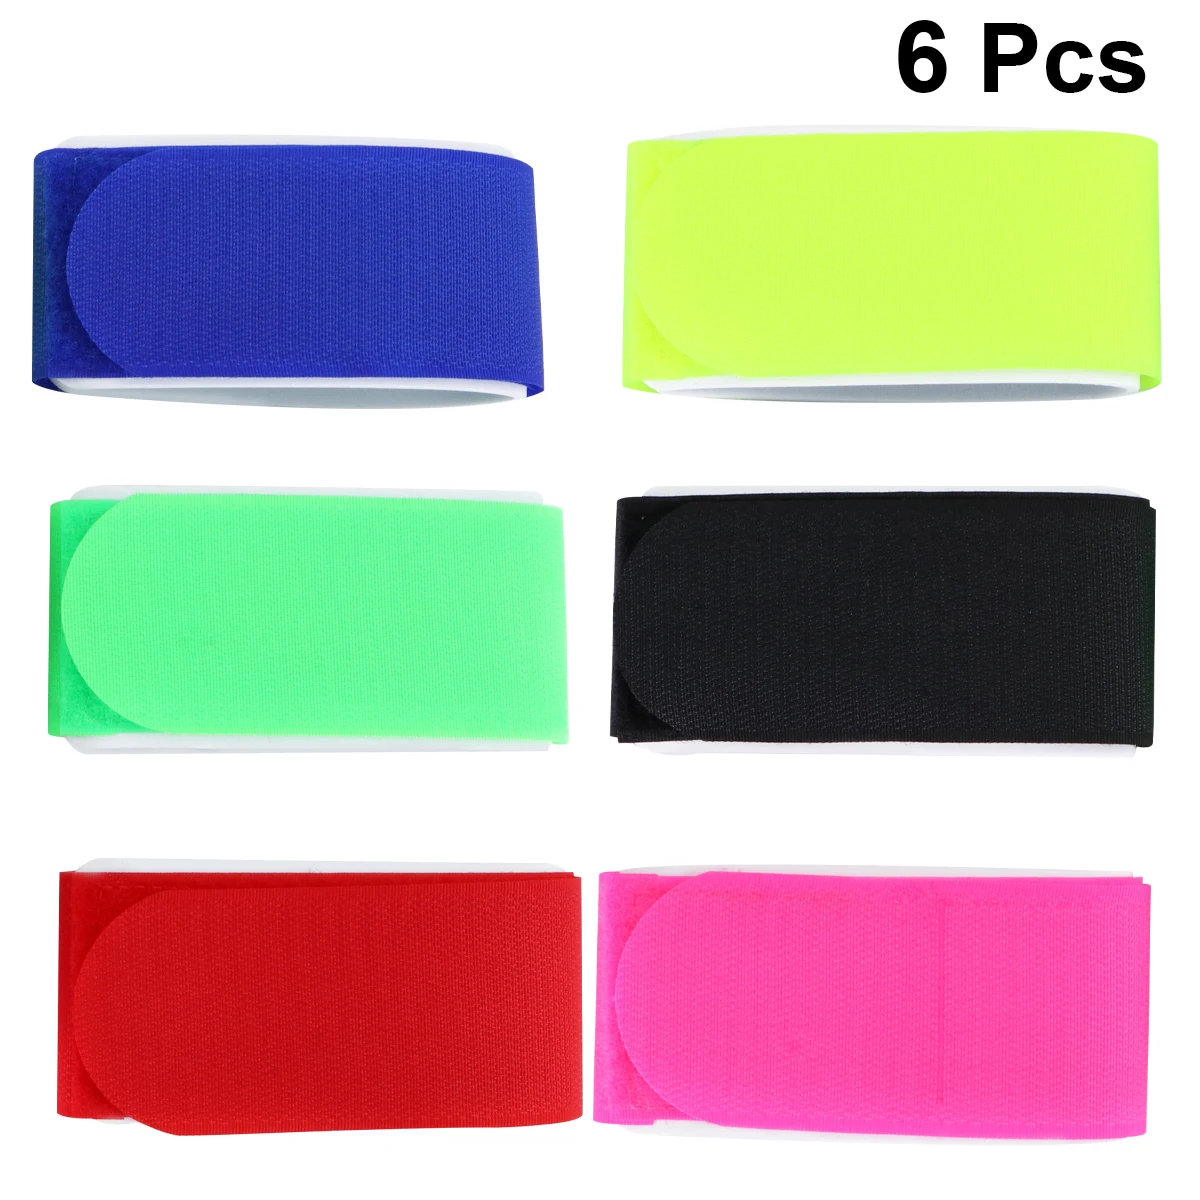 6pcs Ski Board Straps Double Board Fixed Hand Tote Straps For Outdoor Skiing